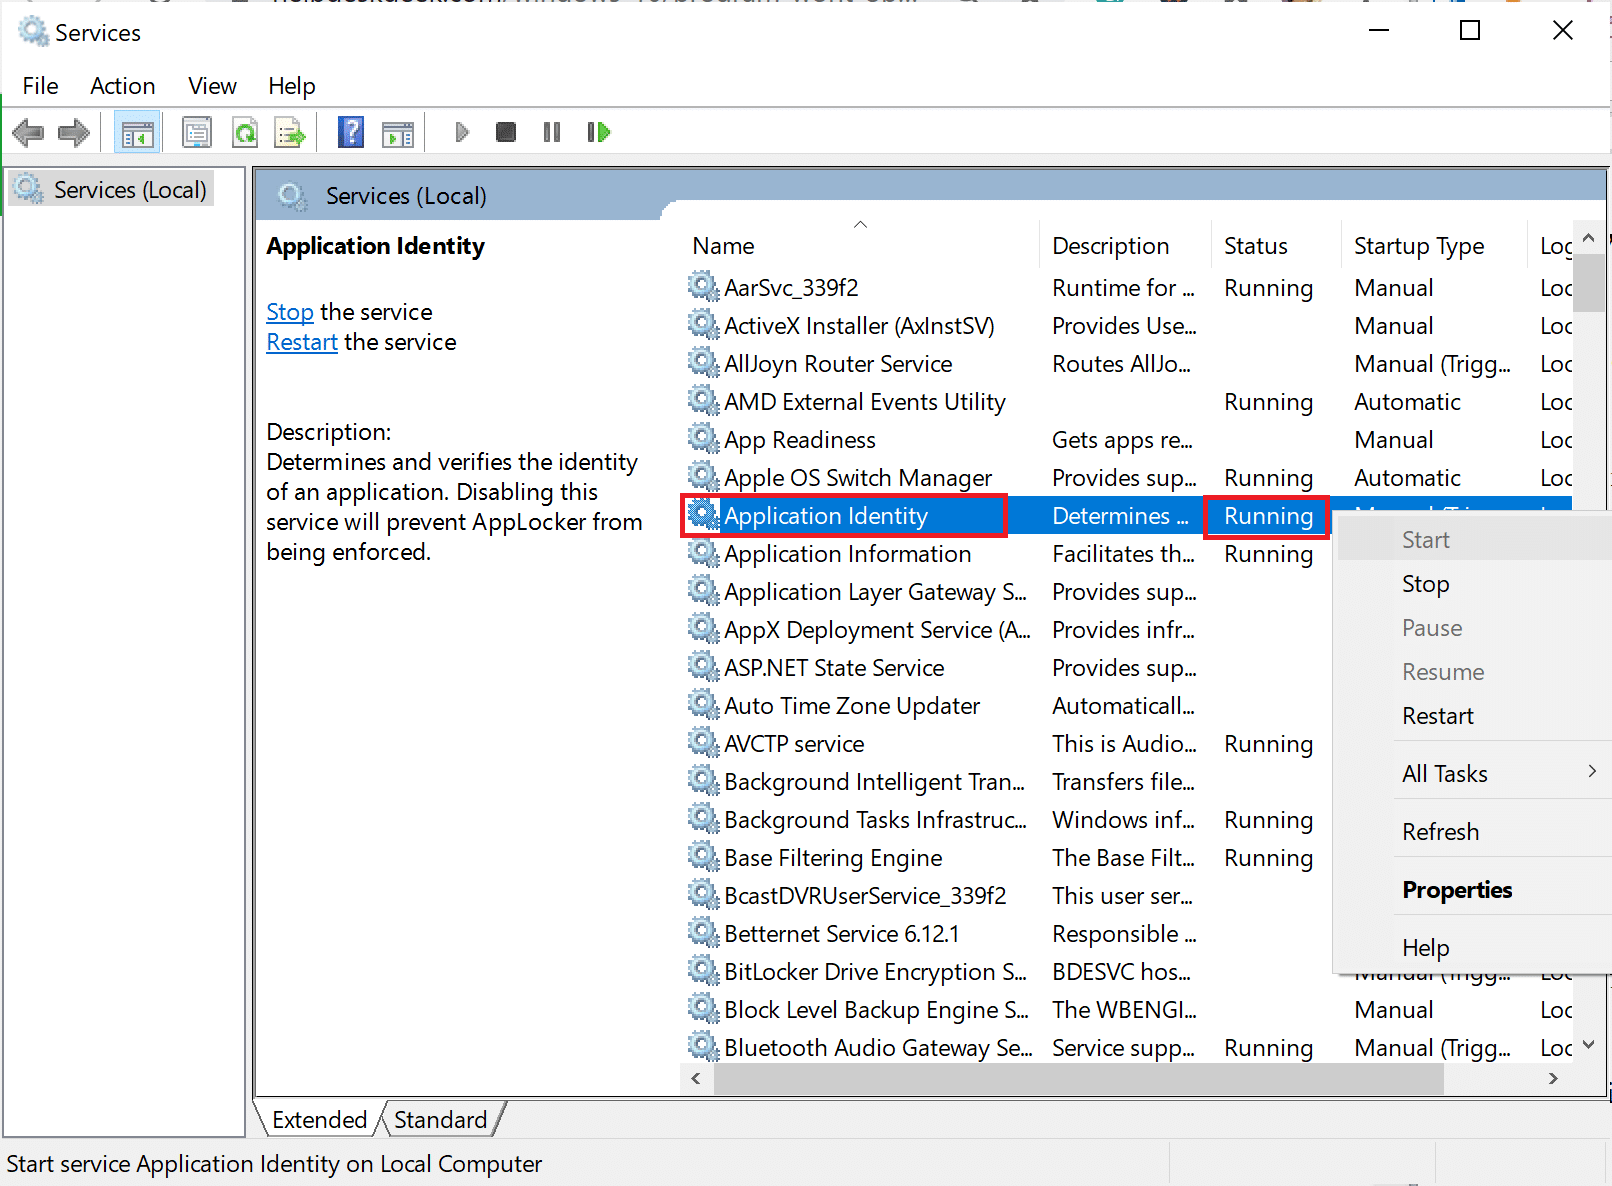 locate Application Identity in the Services window | Fix Windows 10 Apps Not Working